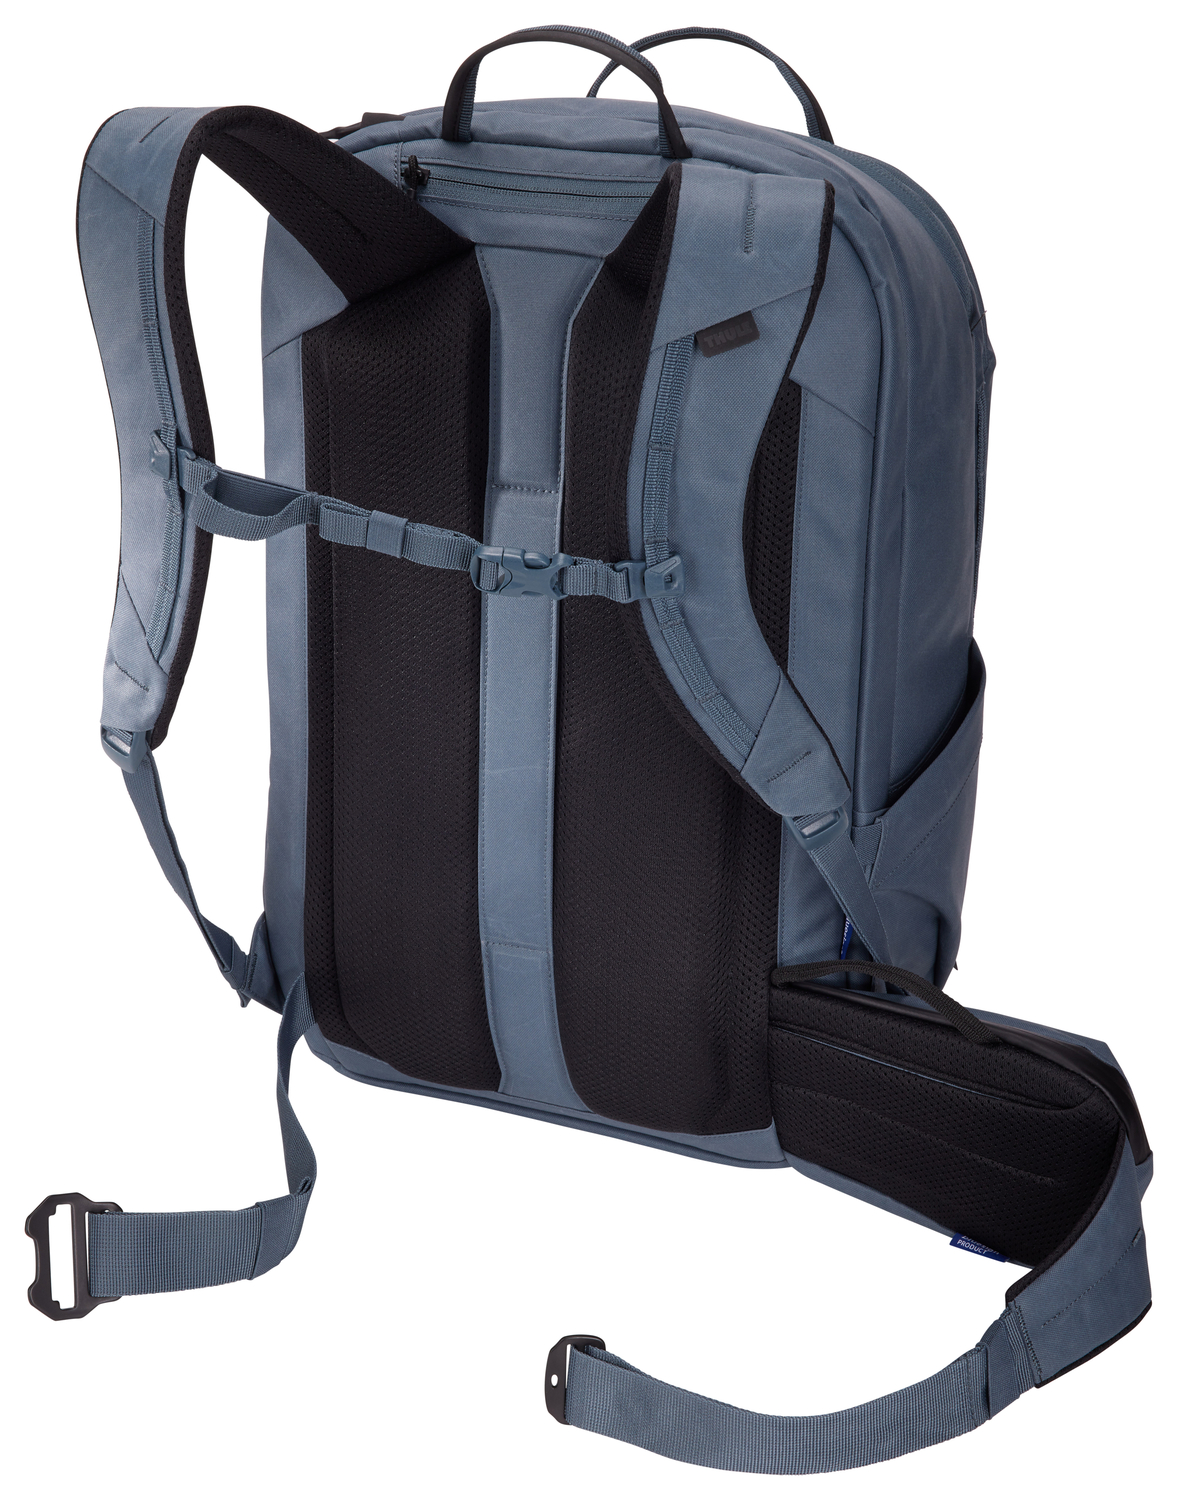 Aion 40L Travel Backpack